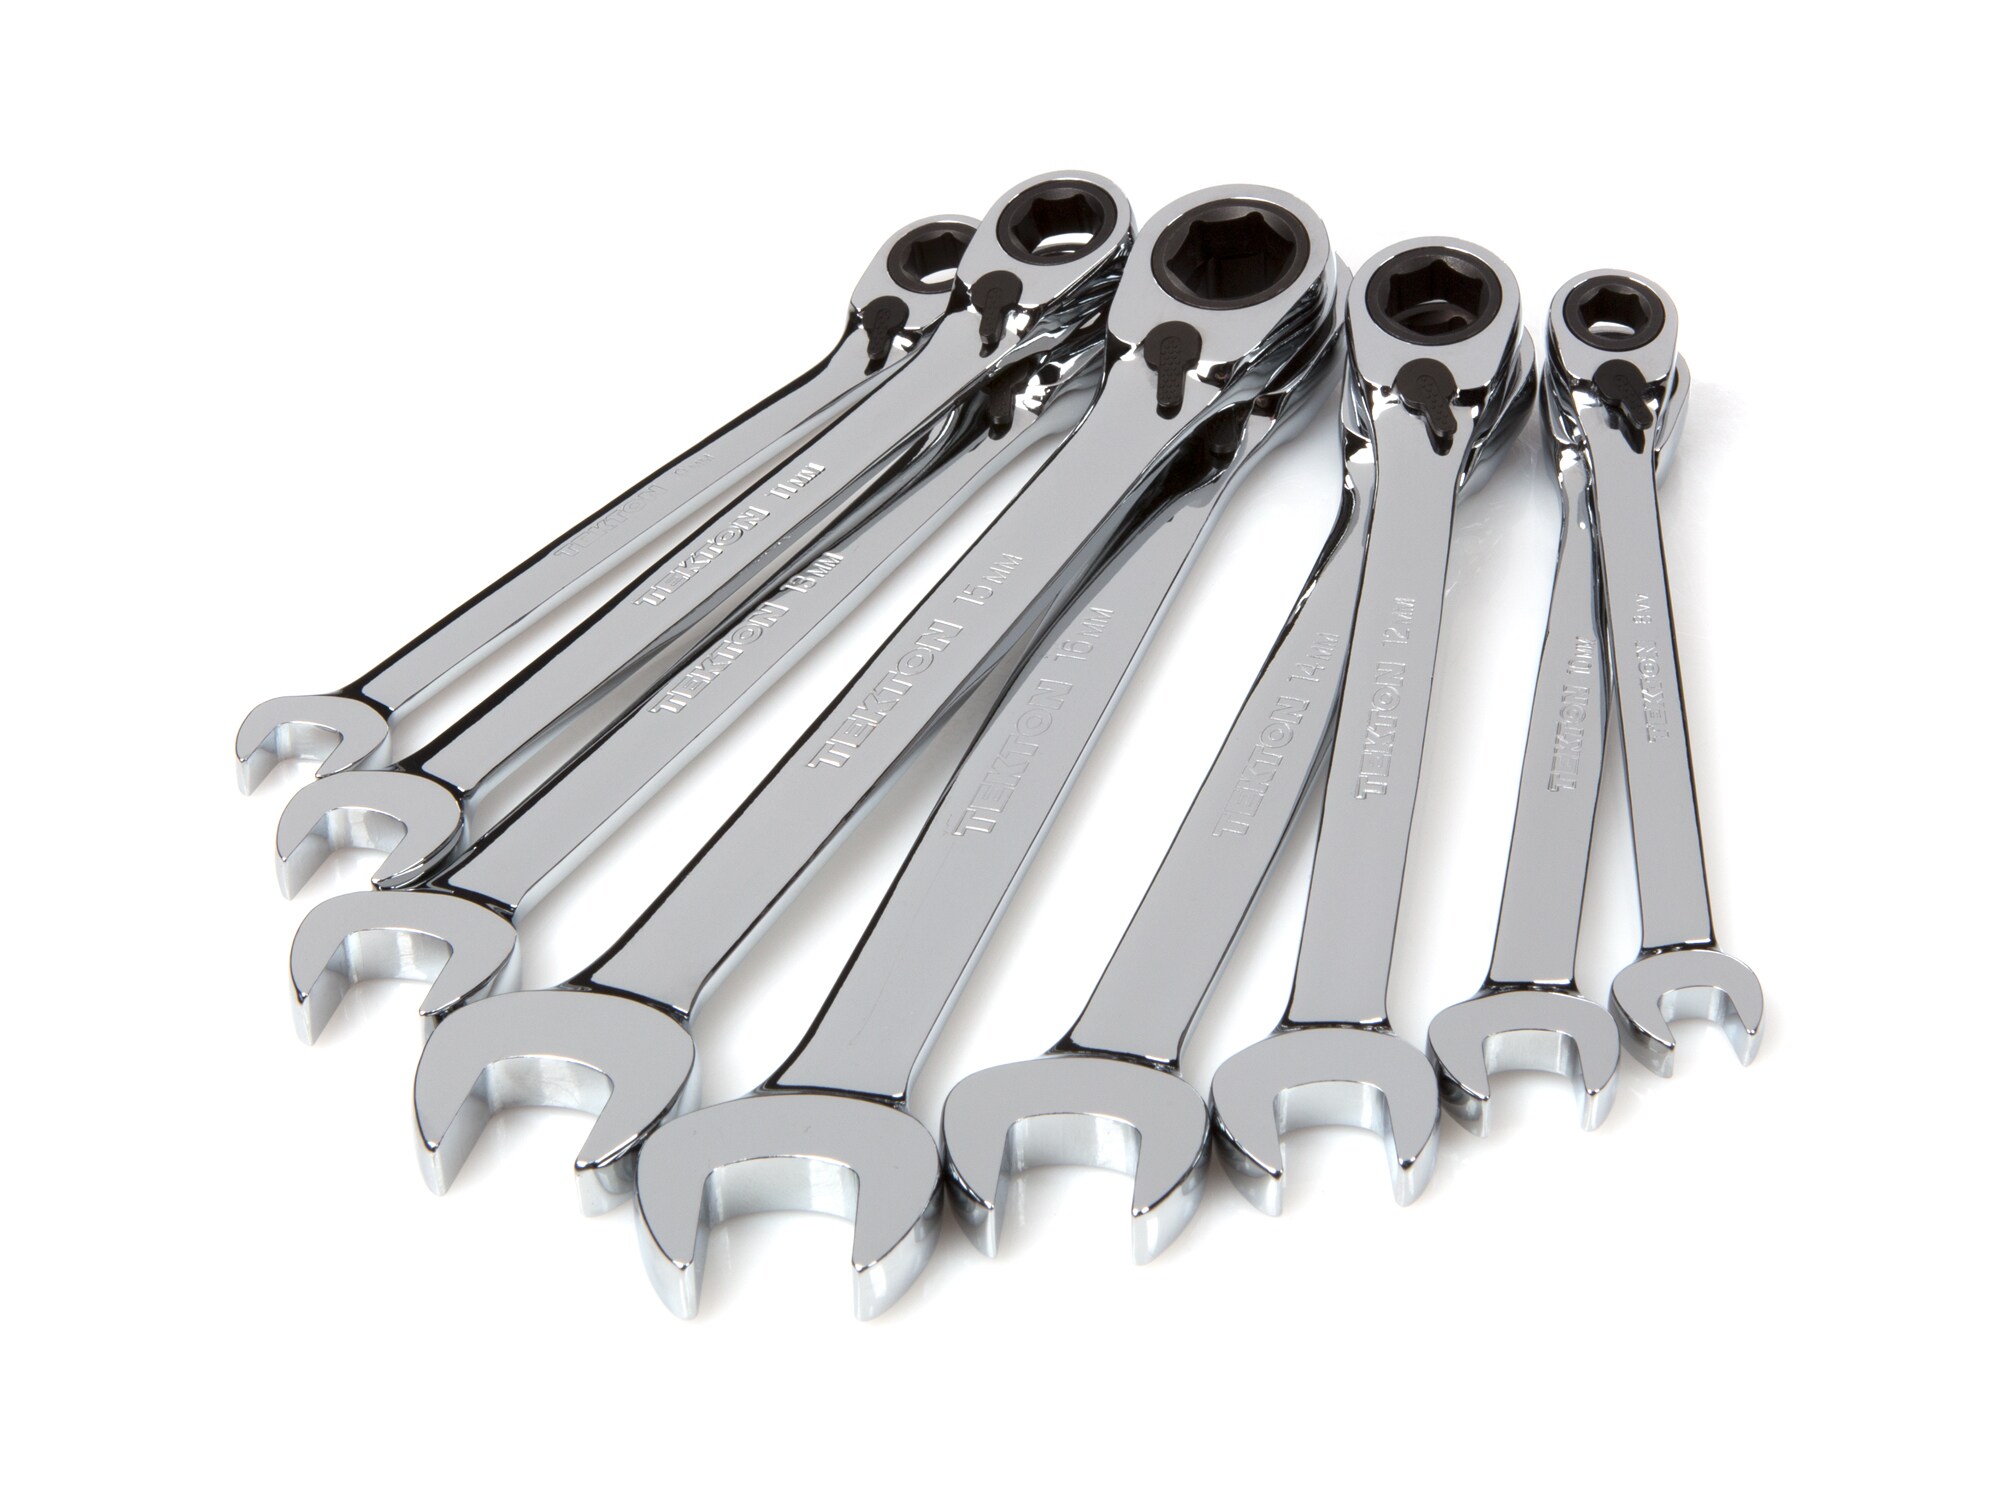 TEKTON 9-Piece Set 6-point Metric Ratchet Wrench at Lowes.com